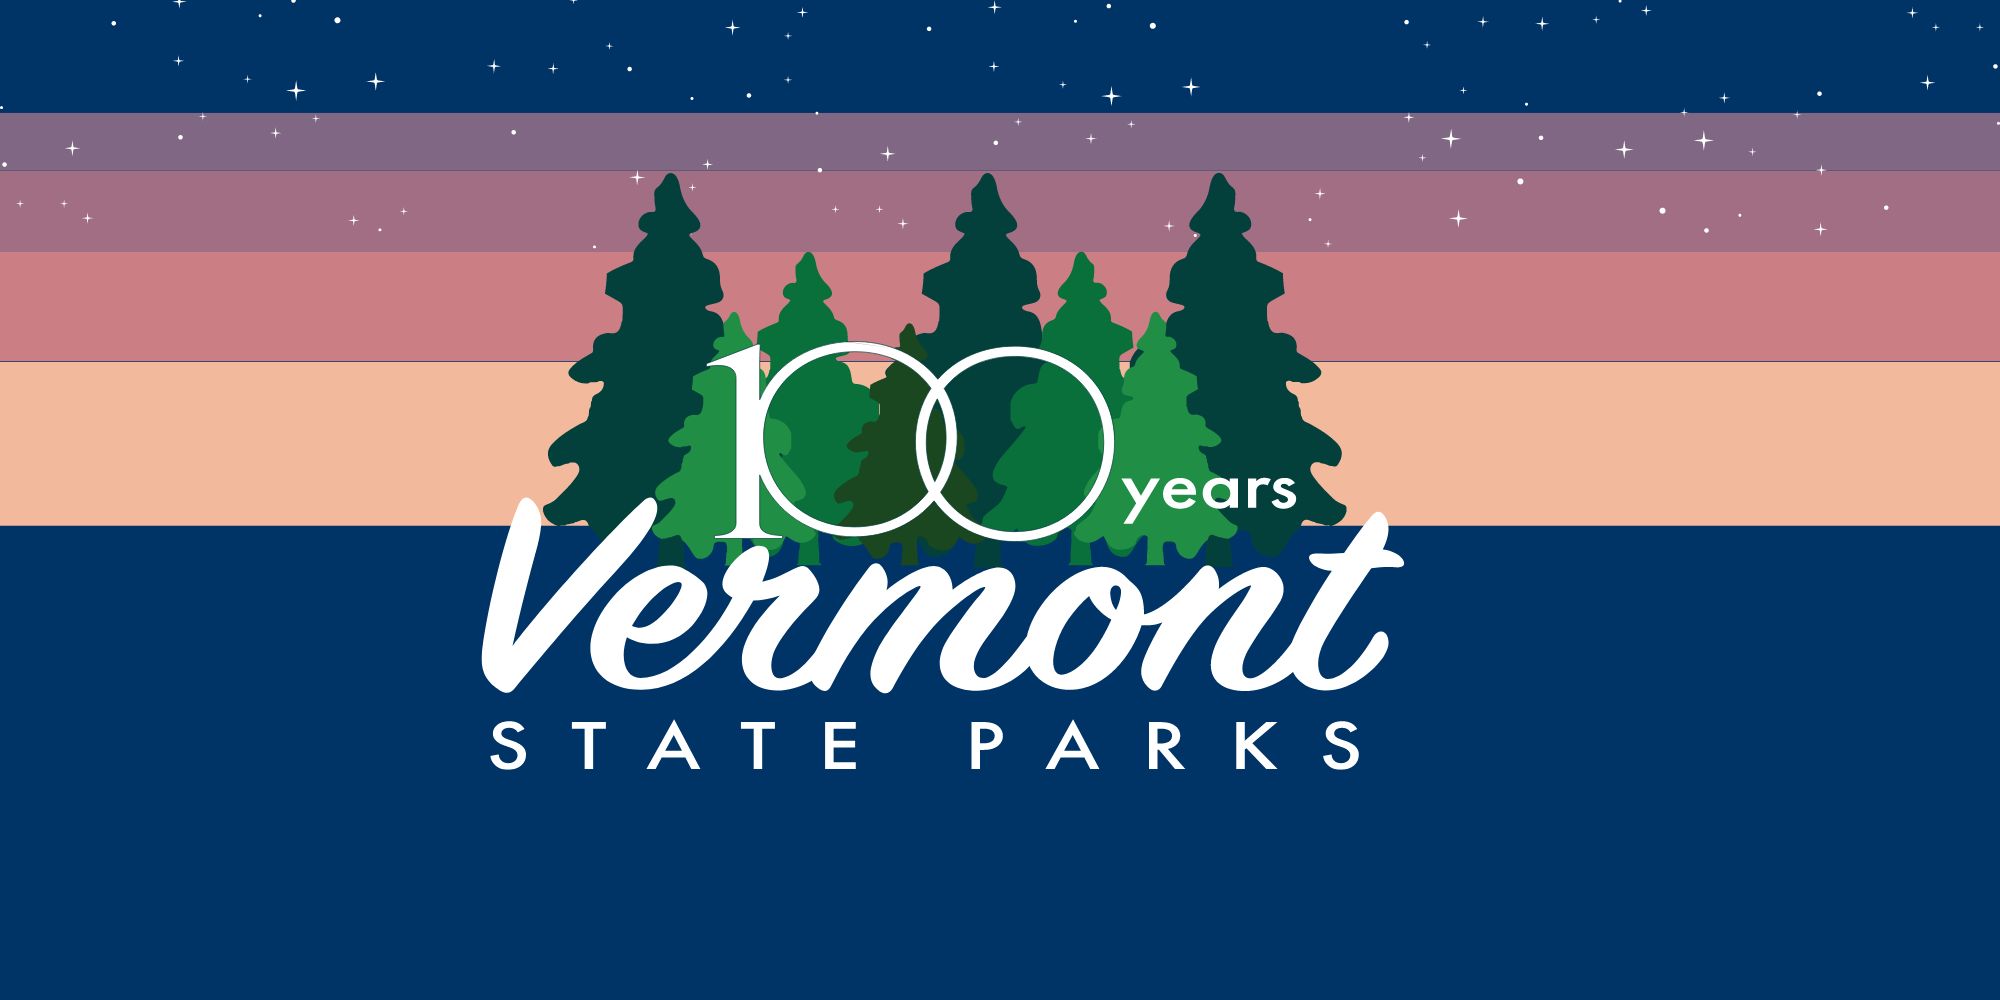 State Parks 100th anniversary